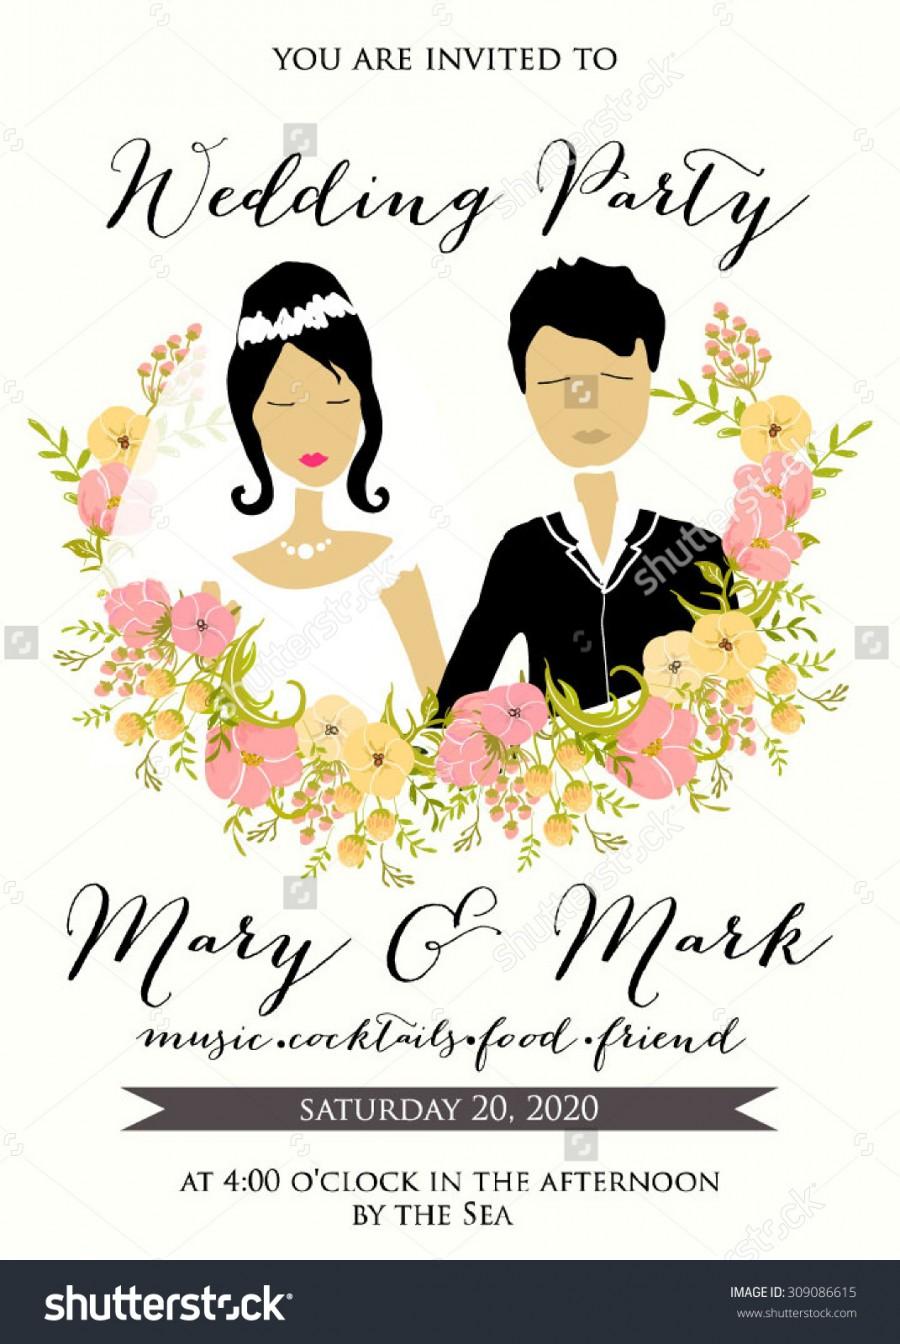 Wedding - Wedding card or invitation with floral background